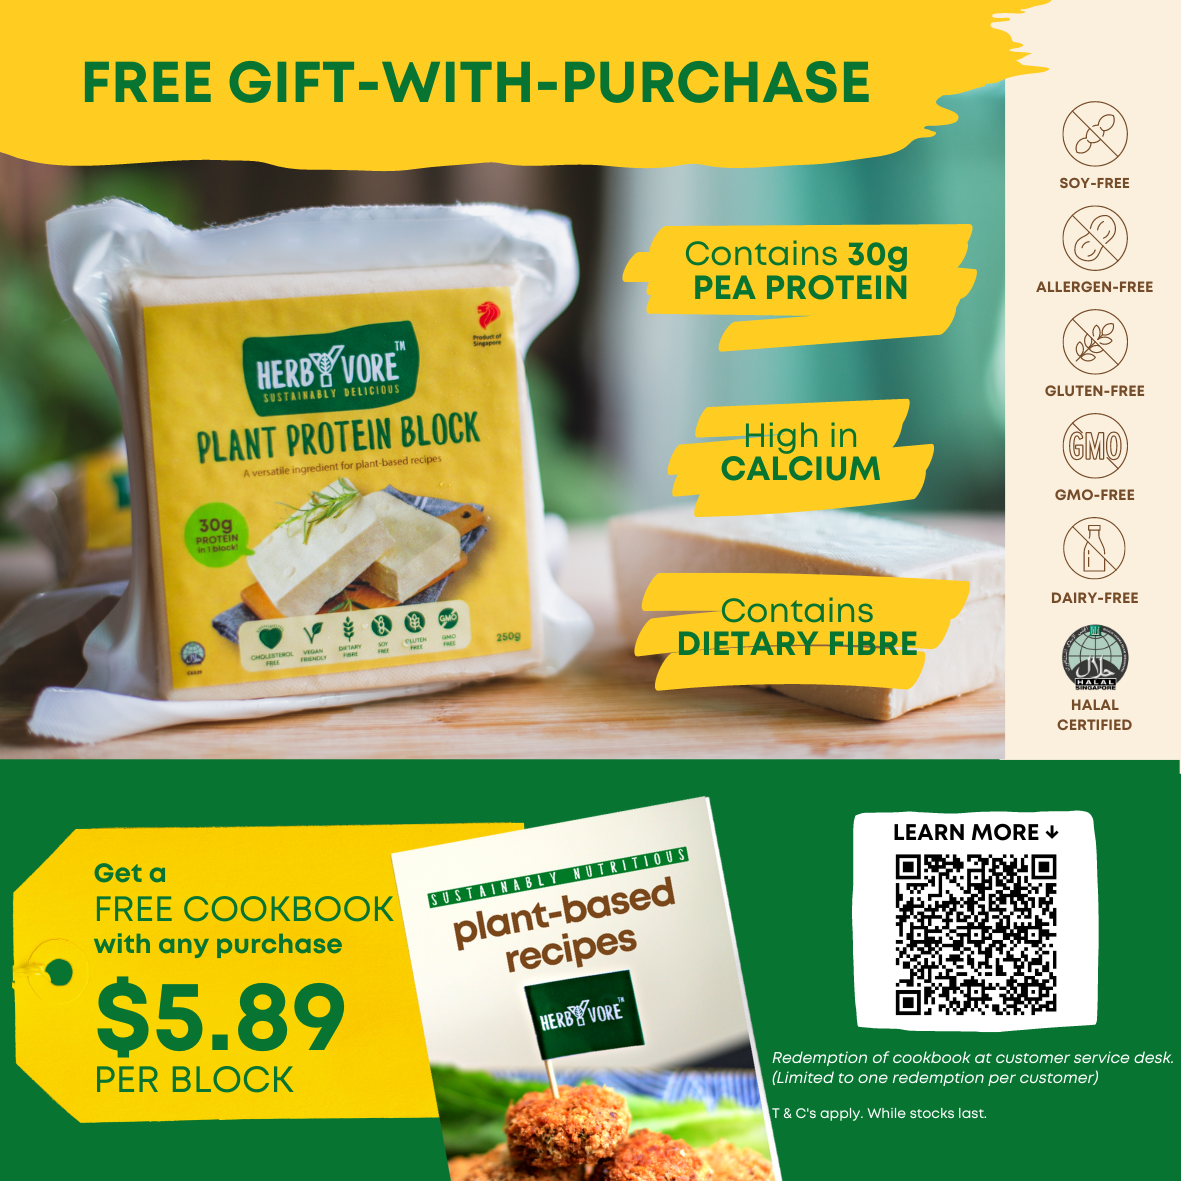 HerbYvore Plant Protein Block - Revised Pricing & Free Gift-With-Purchase